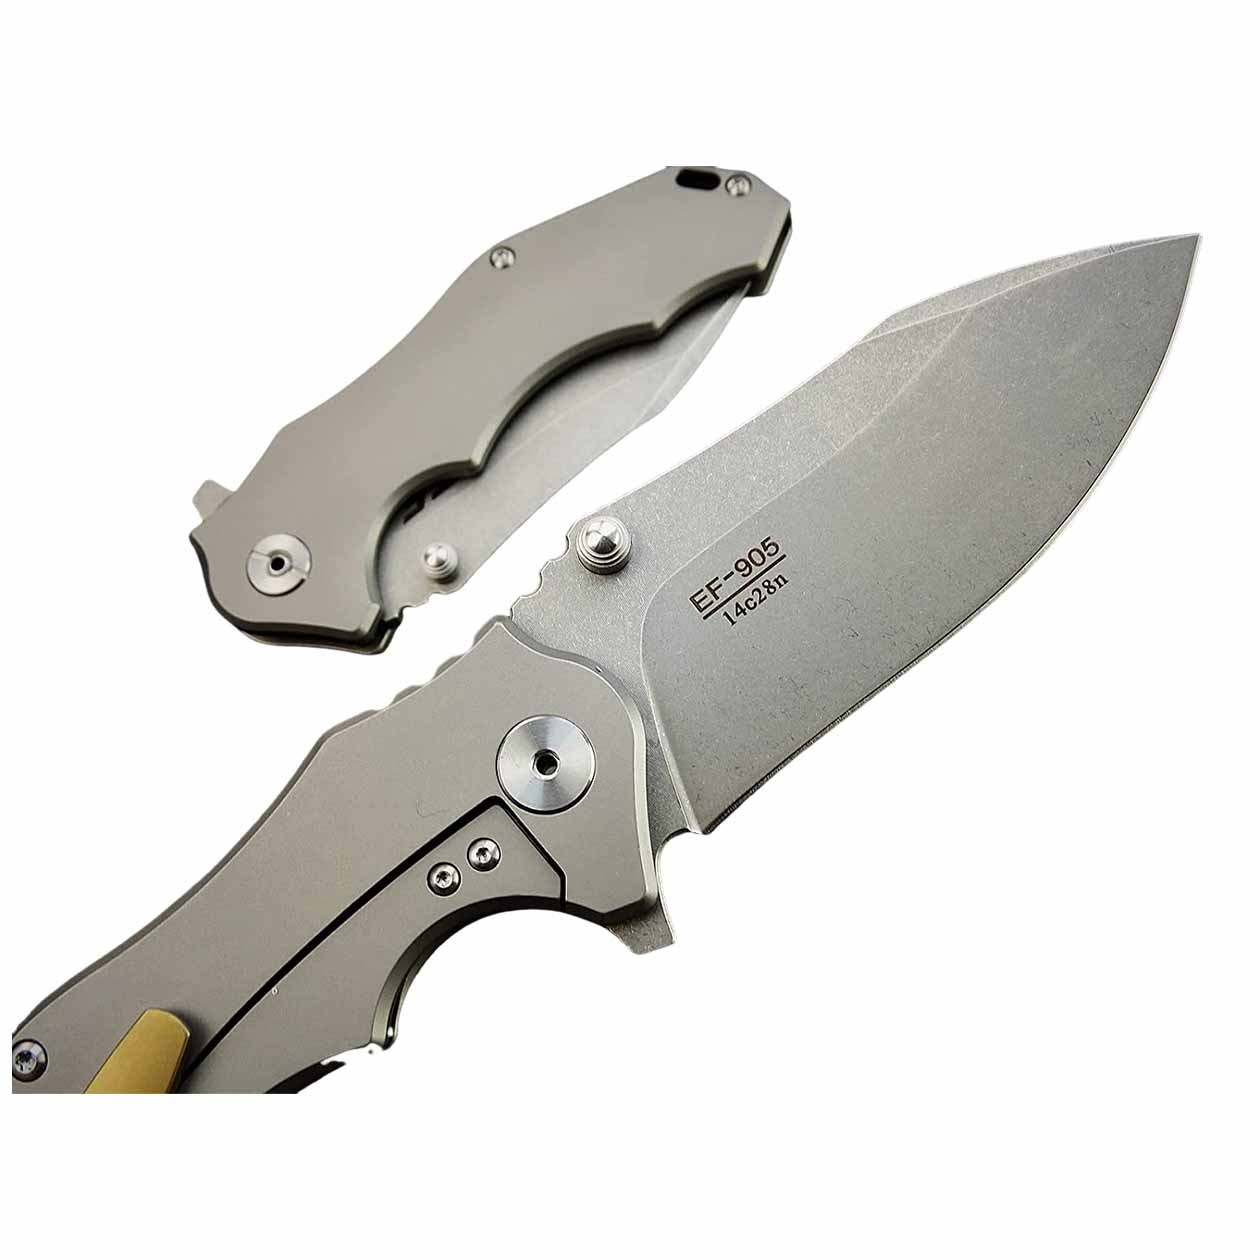 Eafengrow EF905 Folding EDC Tactical knife For survival Hunting